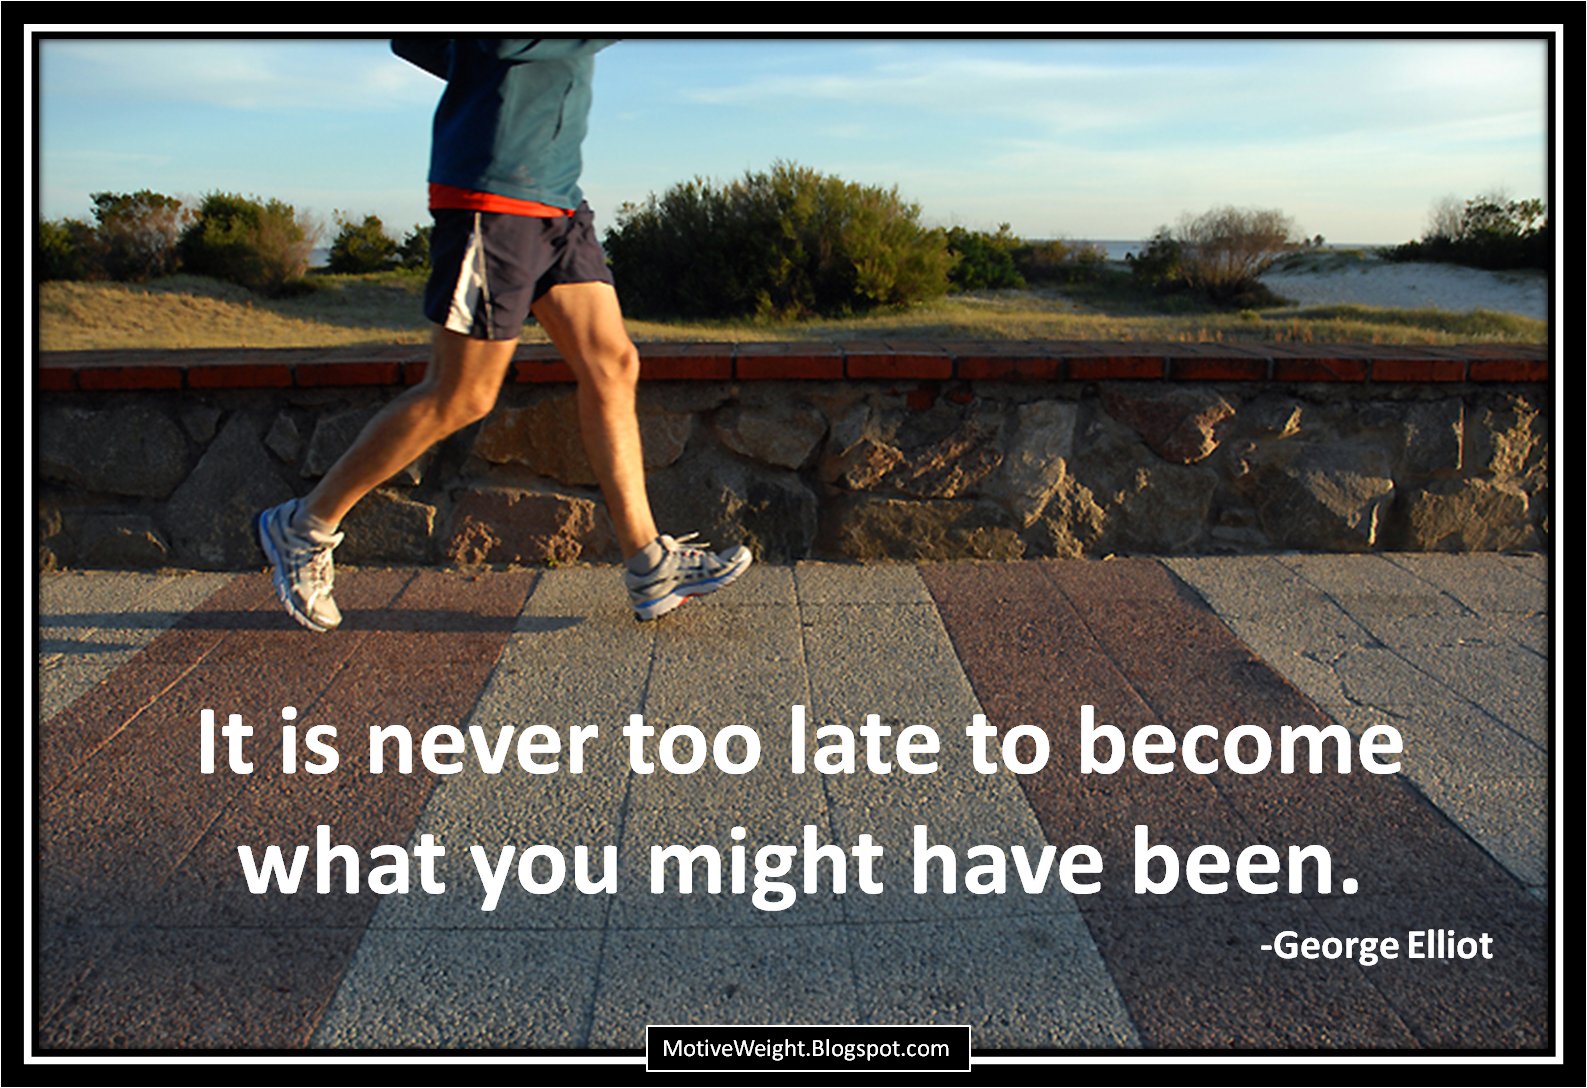 It s Never Too Late To Be e What You Might Have Been